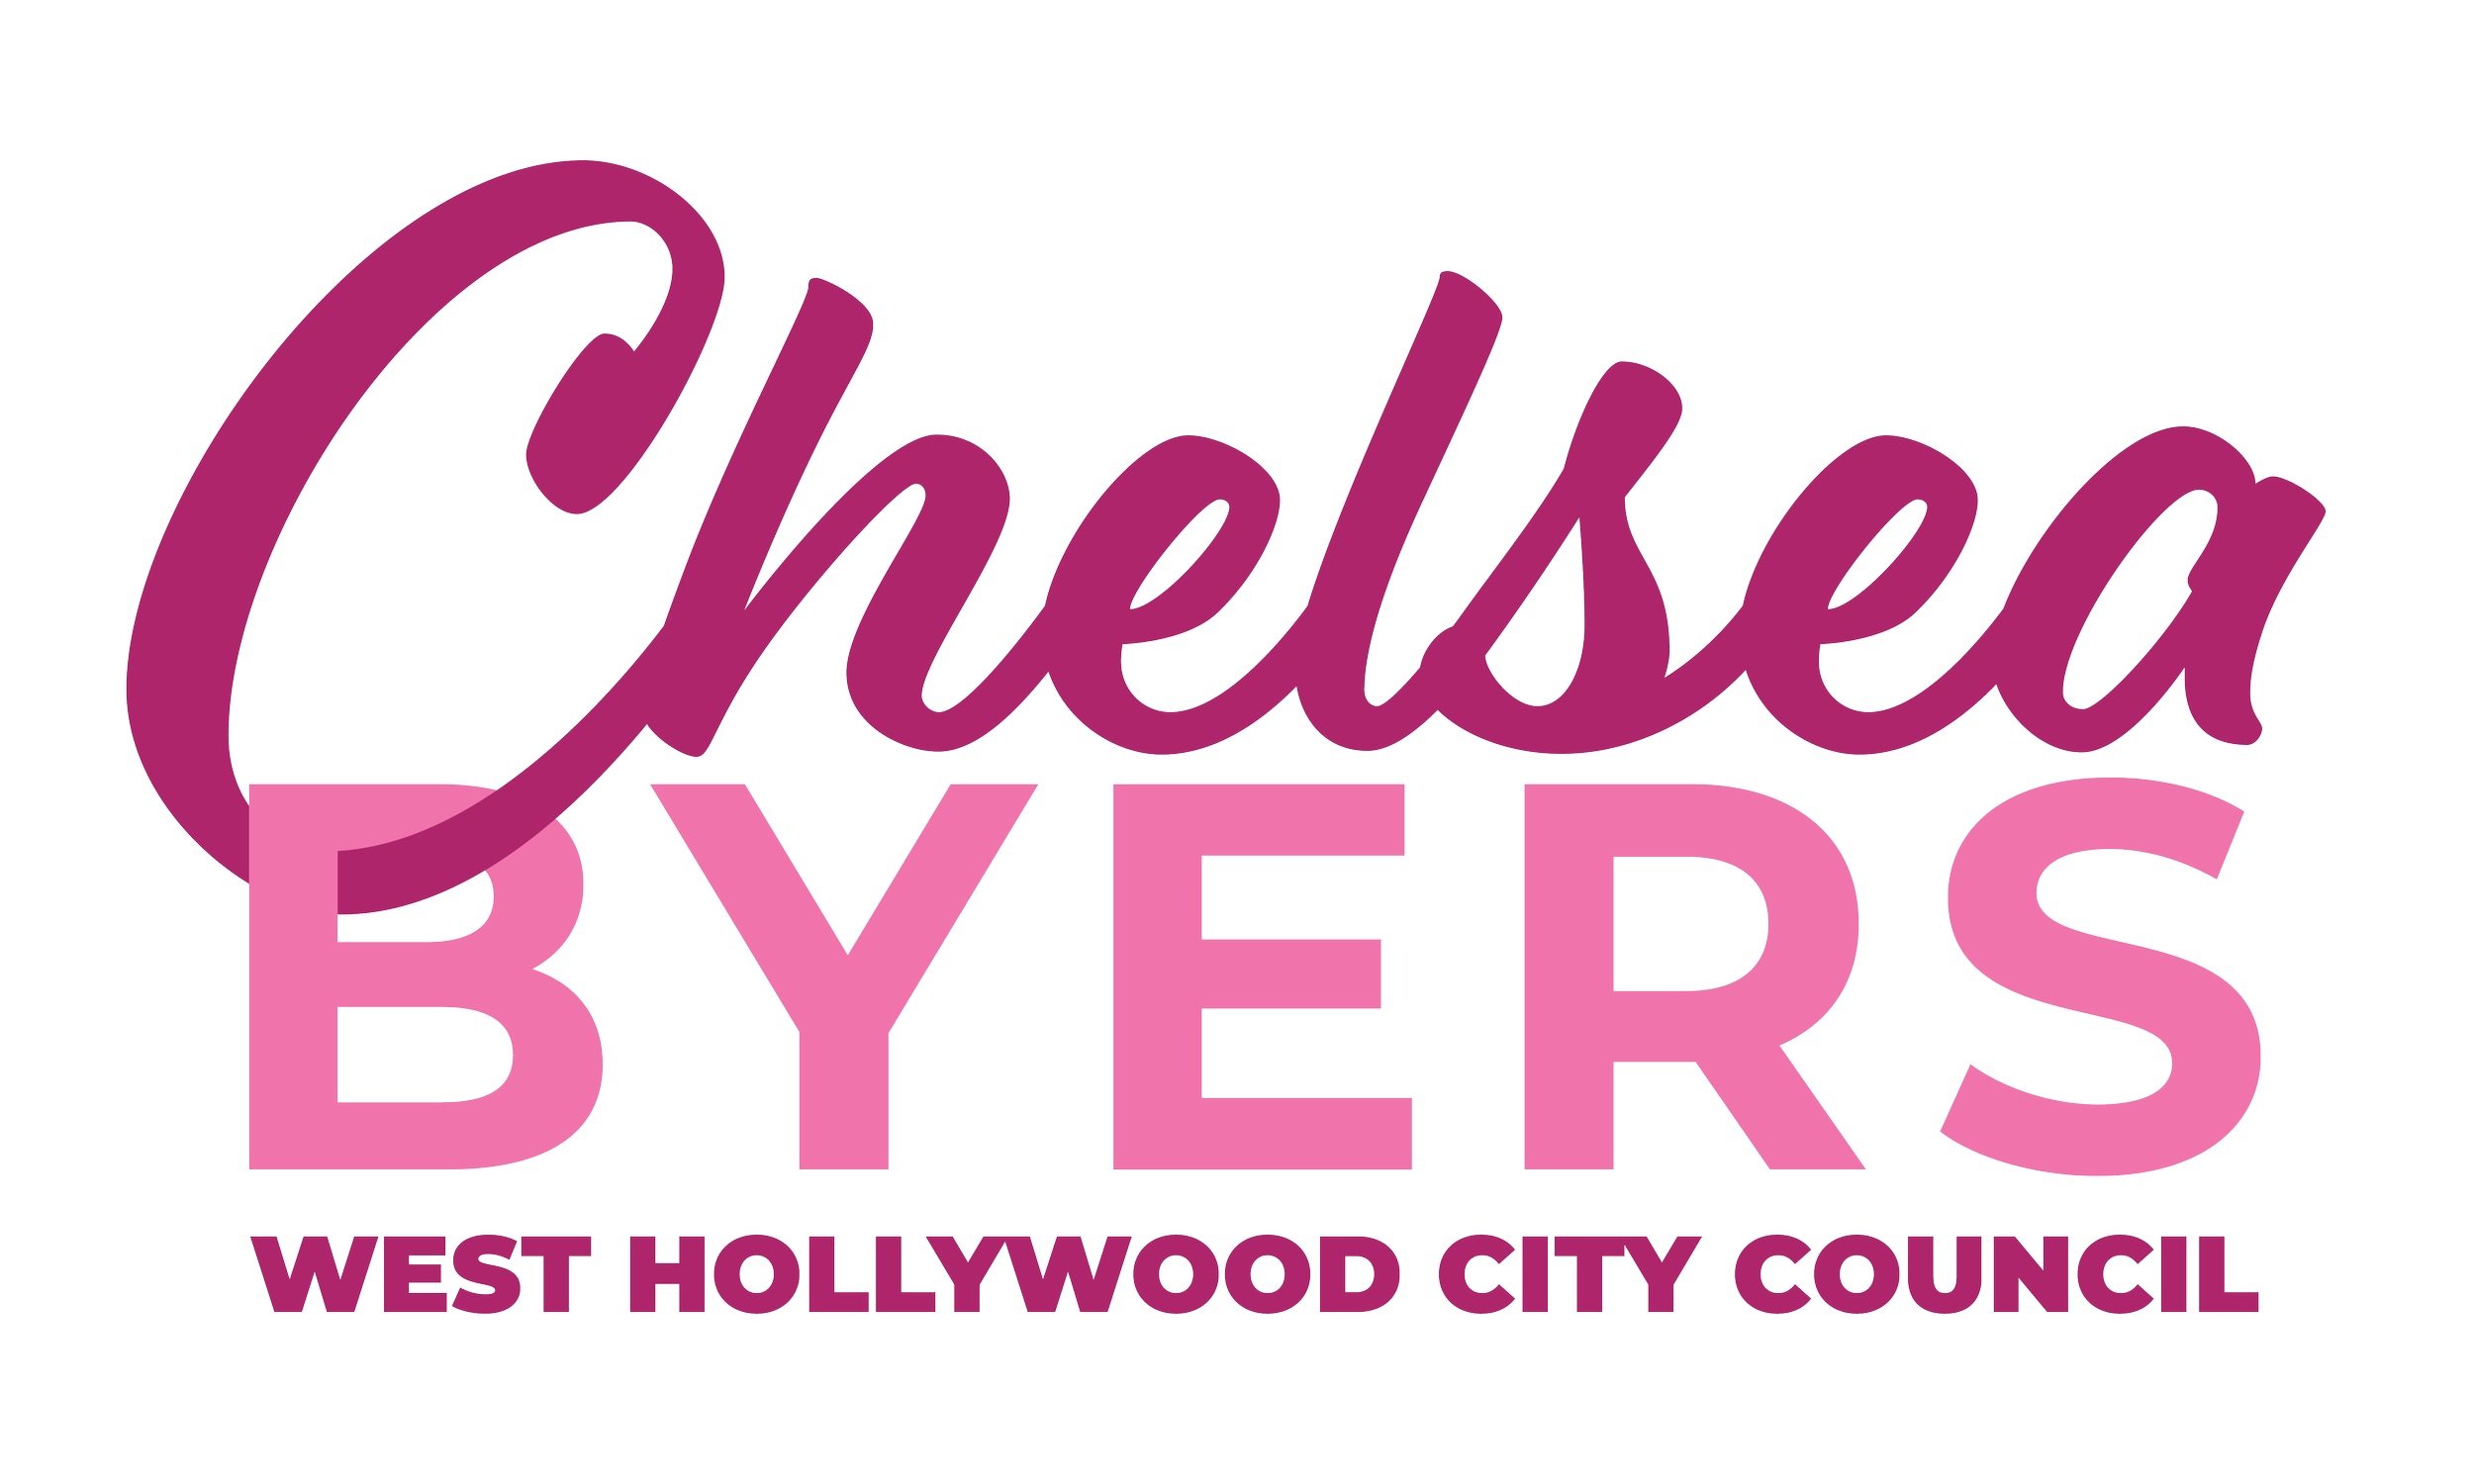 Chelsea Byers for West Hollywood City Council